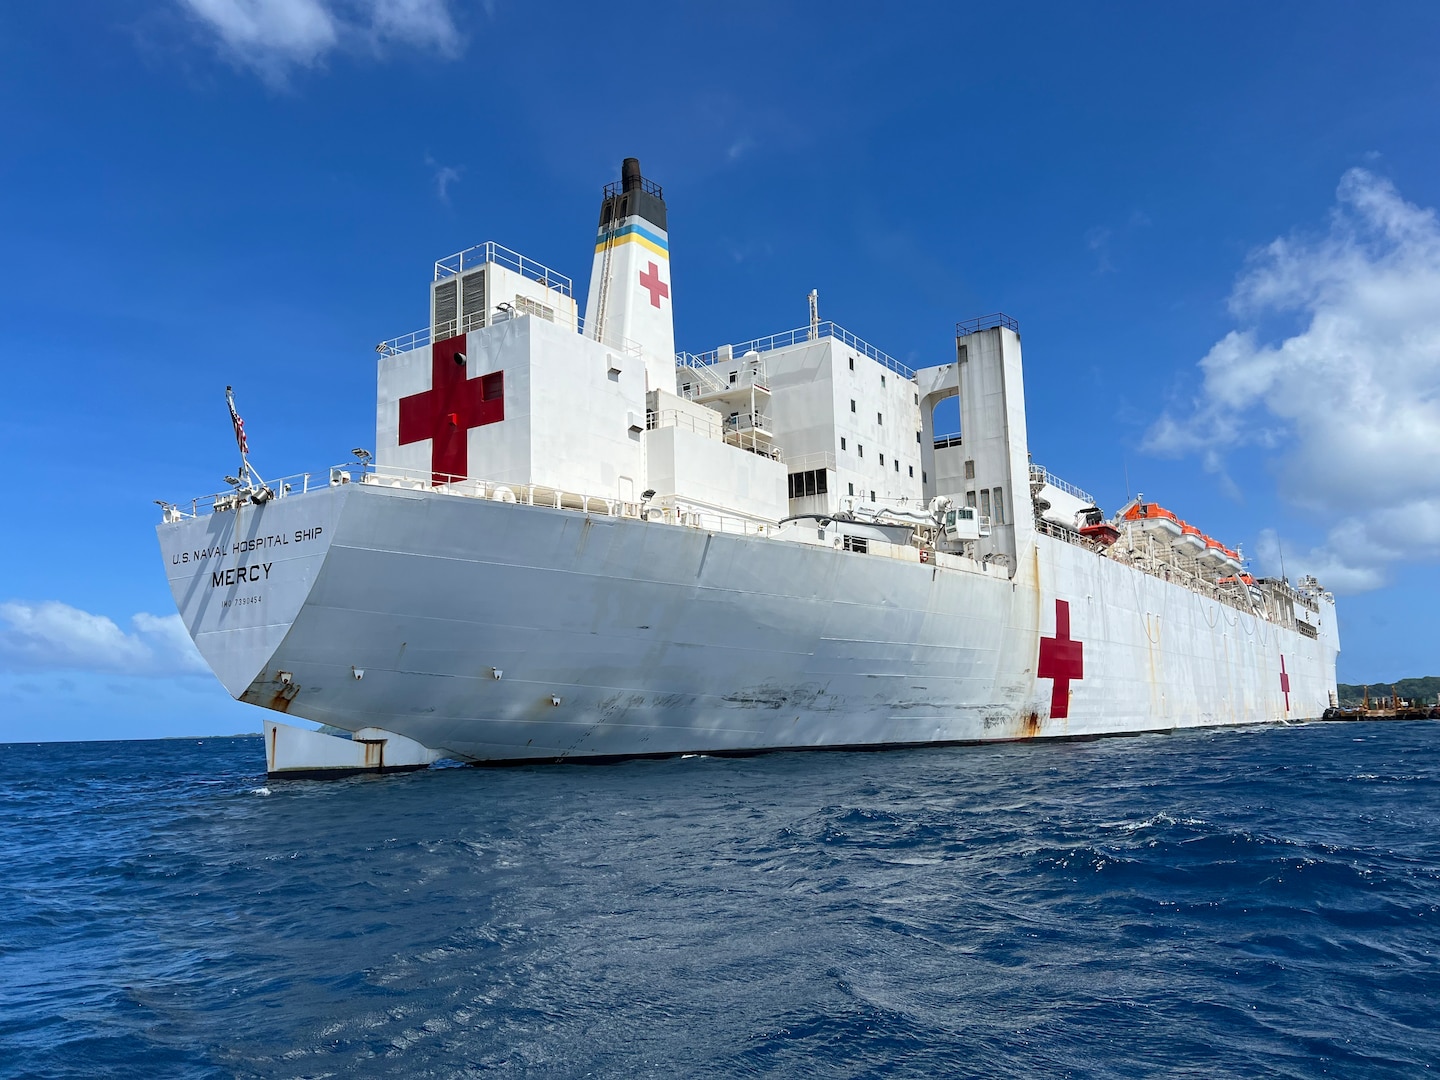 Pacific Partnership, now in its 19th iteration, is the largest multinational humanitarian assistance and disaster relief preparedness mission conducted in the Indo-Pacific and works to enhance regional interoperability and disaster response capabilities, increase security stability in the region, and foster new and enduring friendships.